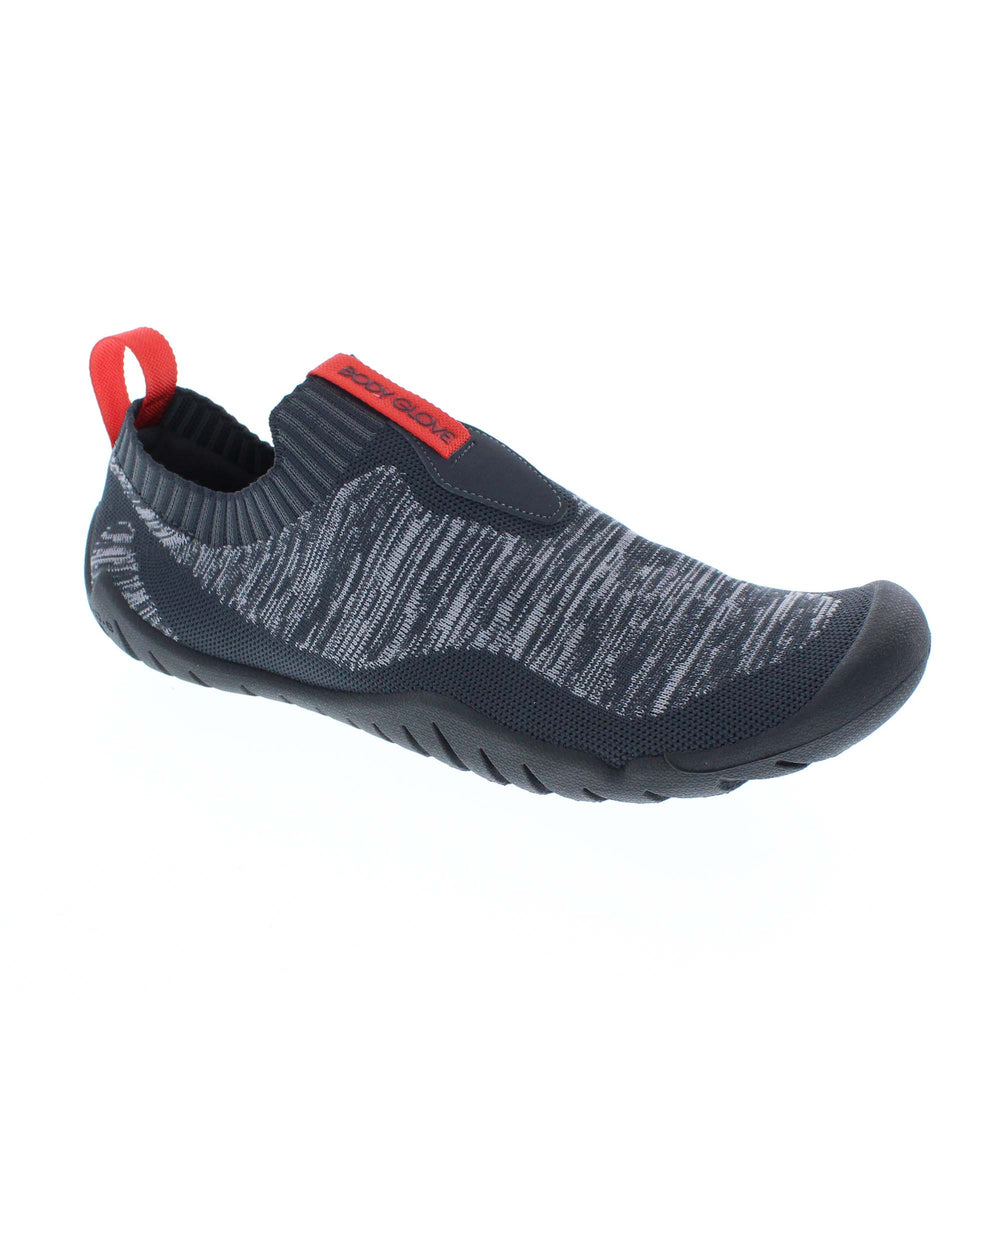 oog herten Rally Men's Hydro Knit Siphon Water Shoes - Black/Rio Red - Body Glove